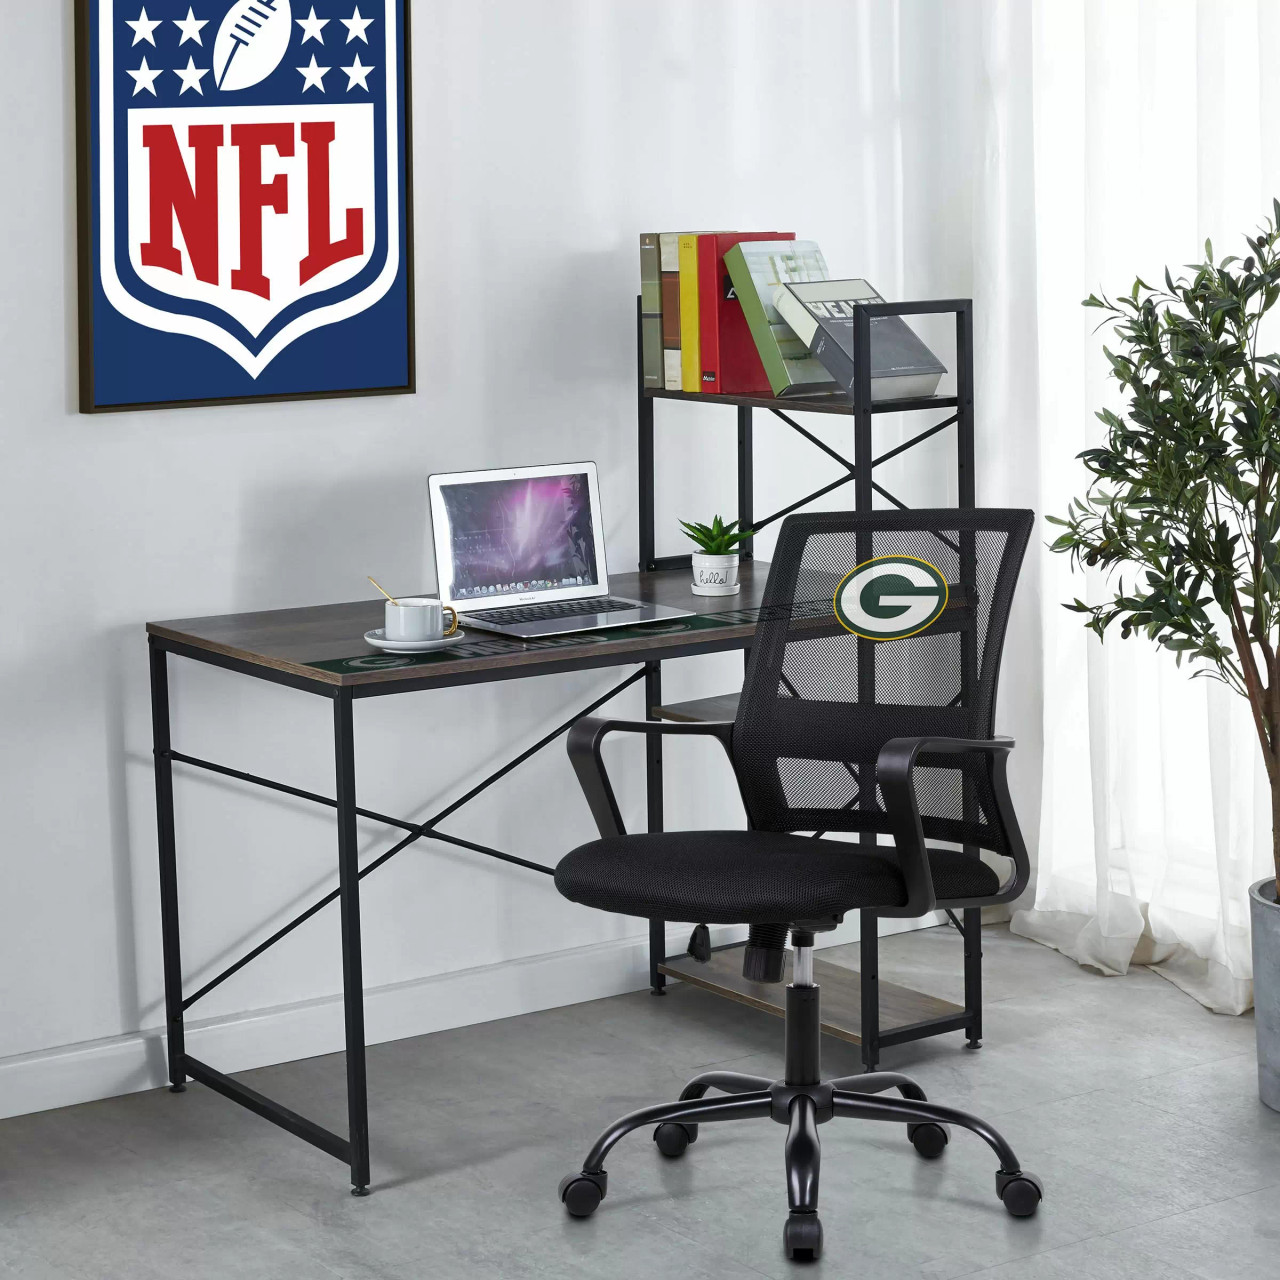 495-1001, Green Bay, GB, Packers, School, Office, Home, Desk, FREE SHIPPING, NFL, Imperial